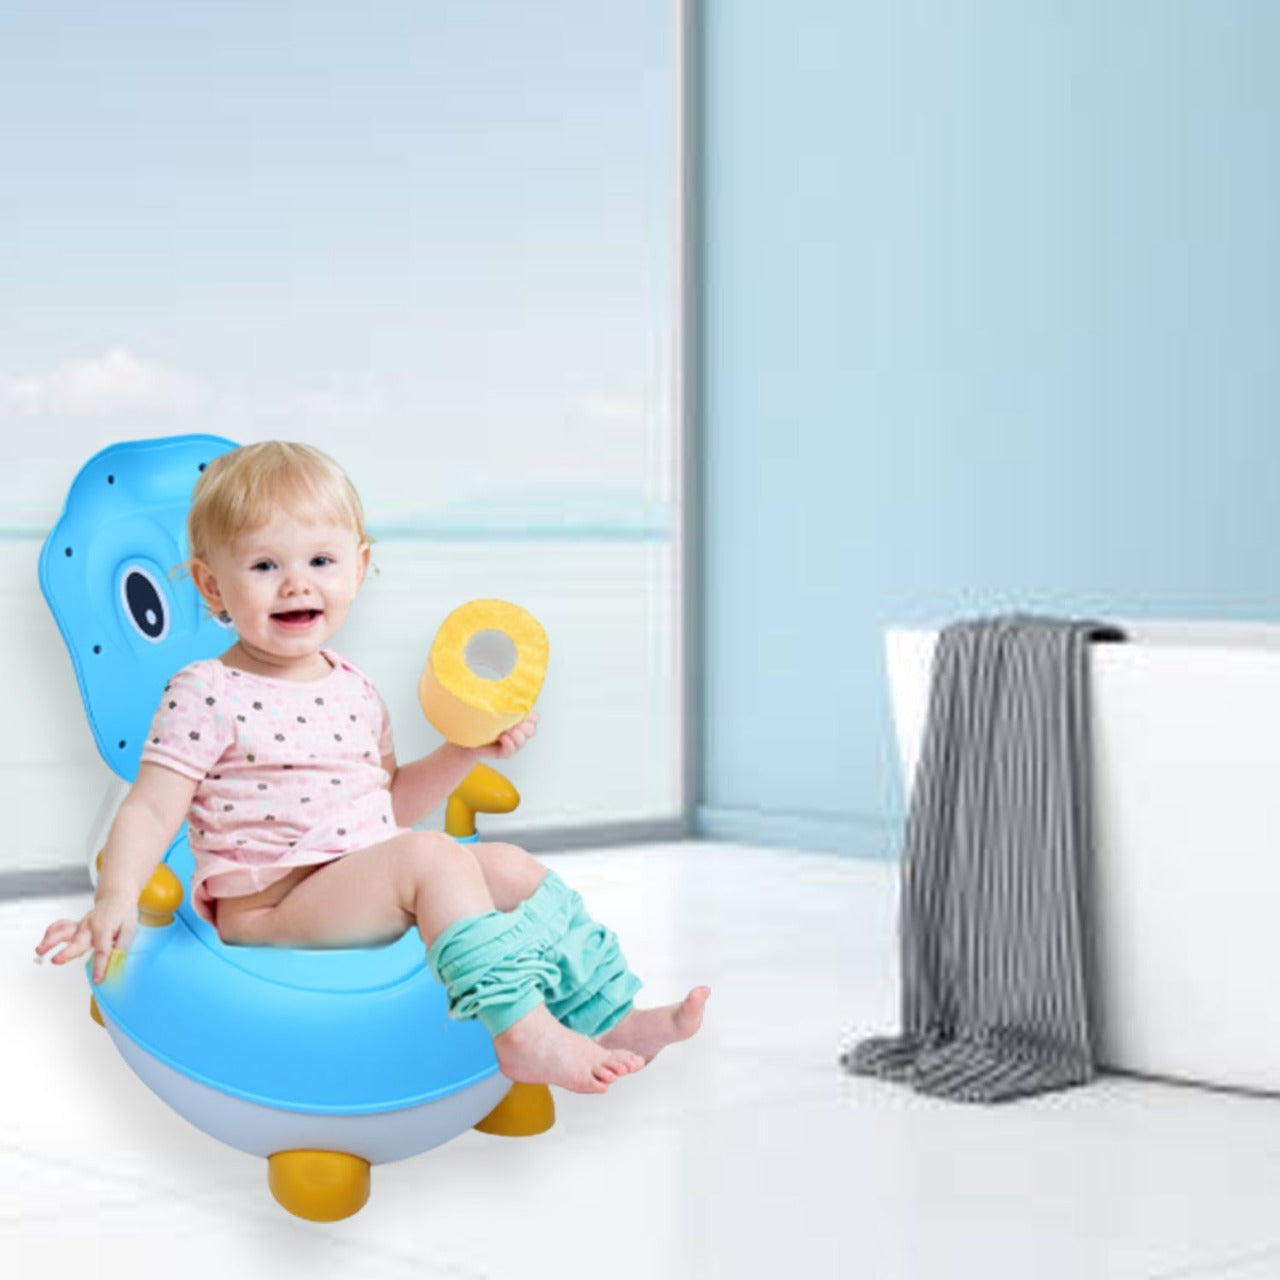 Baby Moo Puppy Detachable Bowl - Handle For Support Toilet Training Potty Chair - Blue